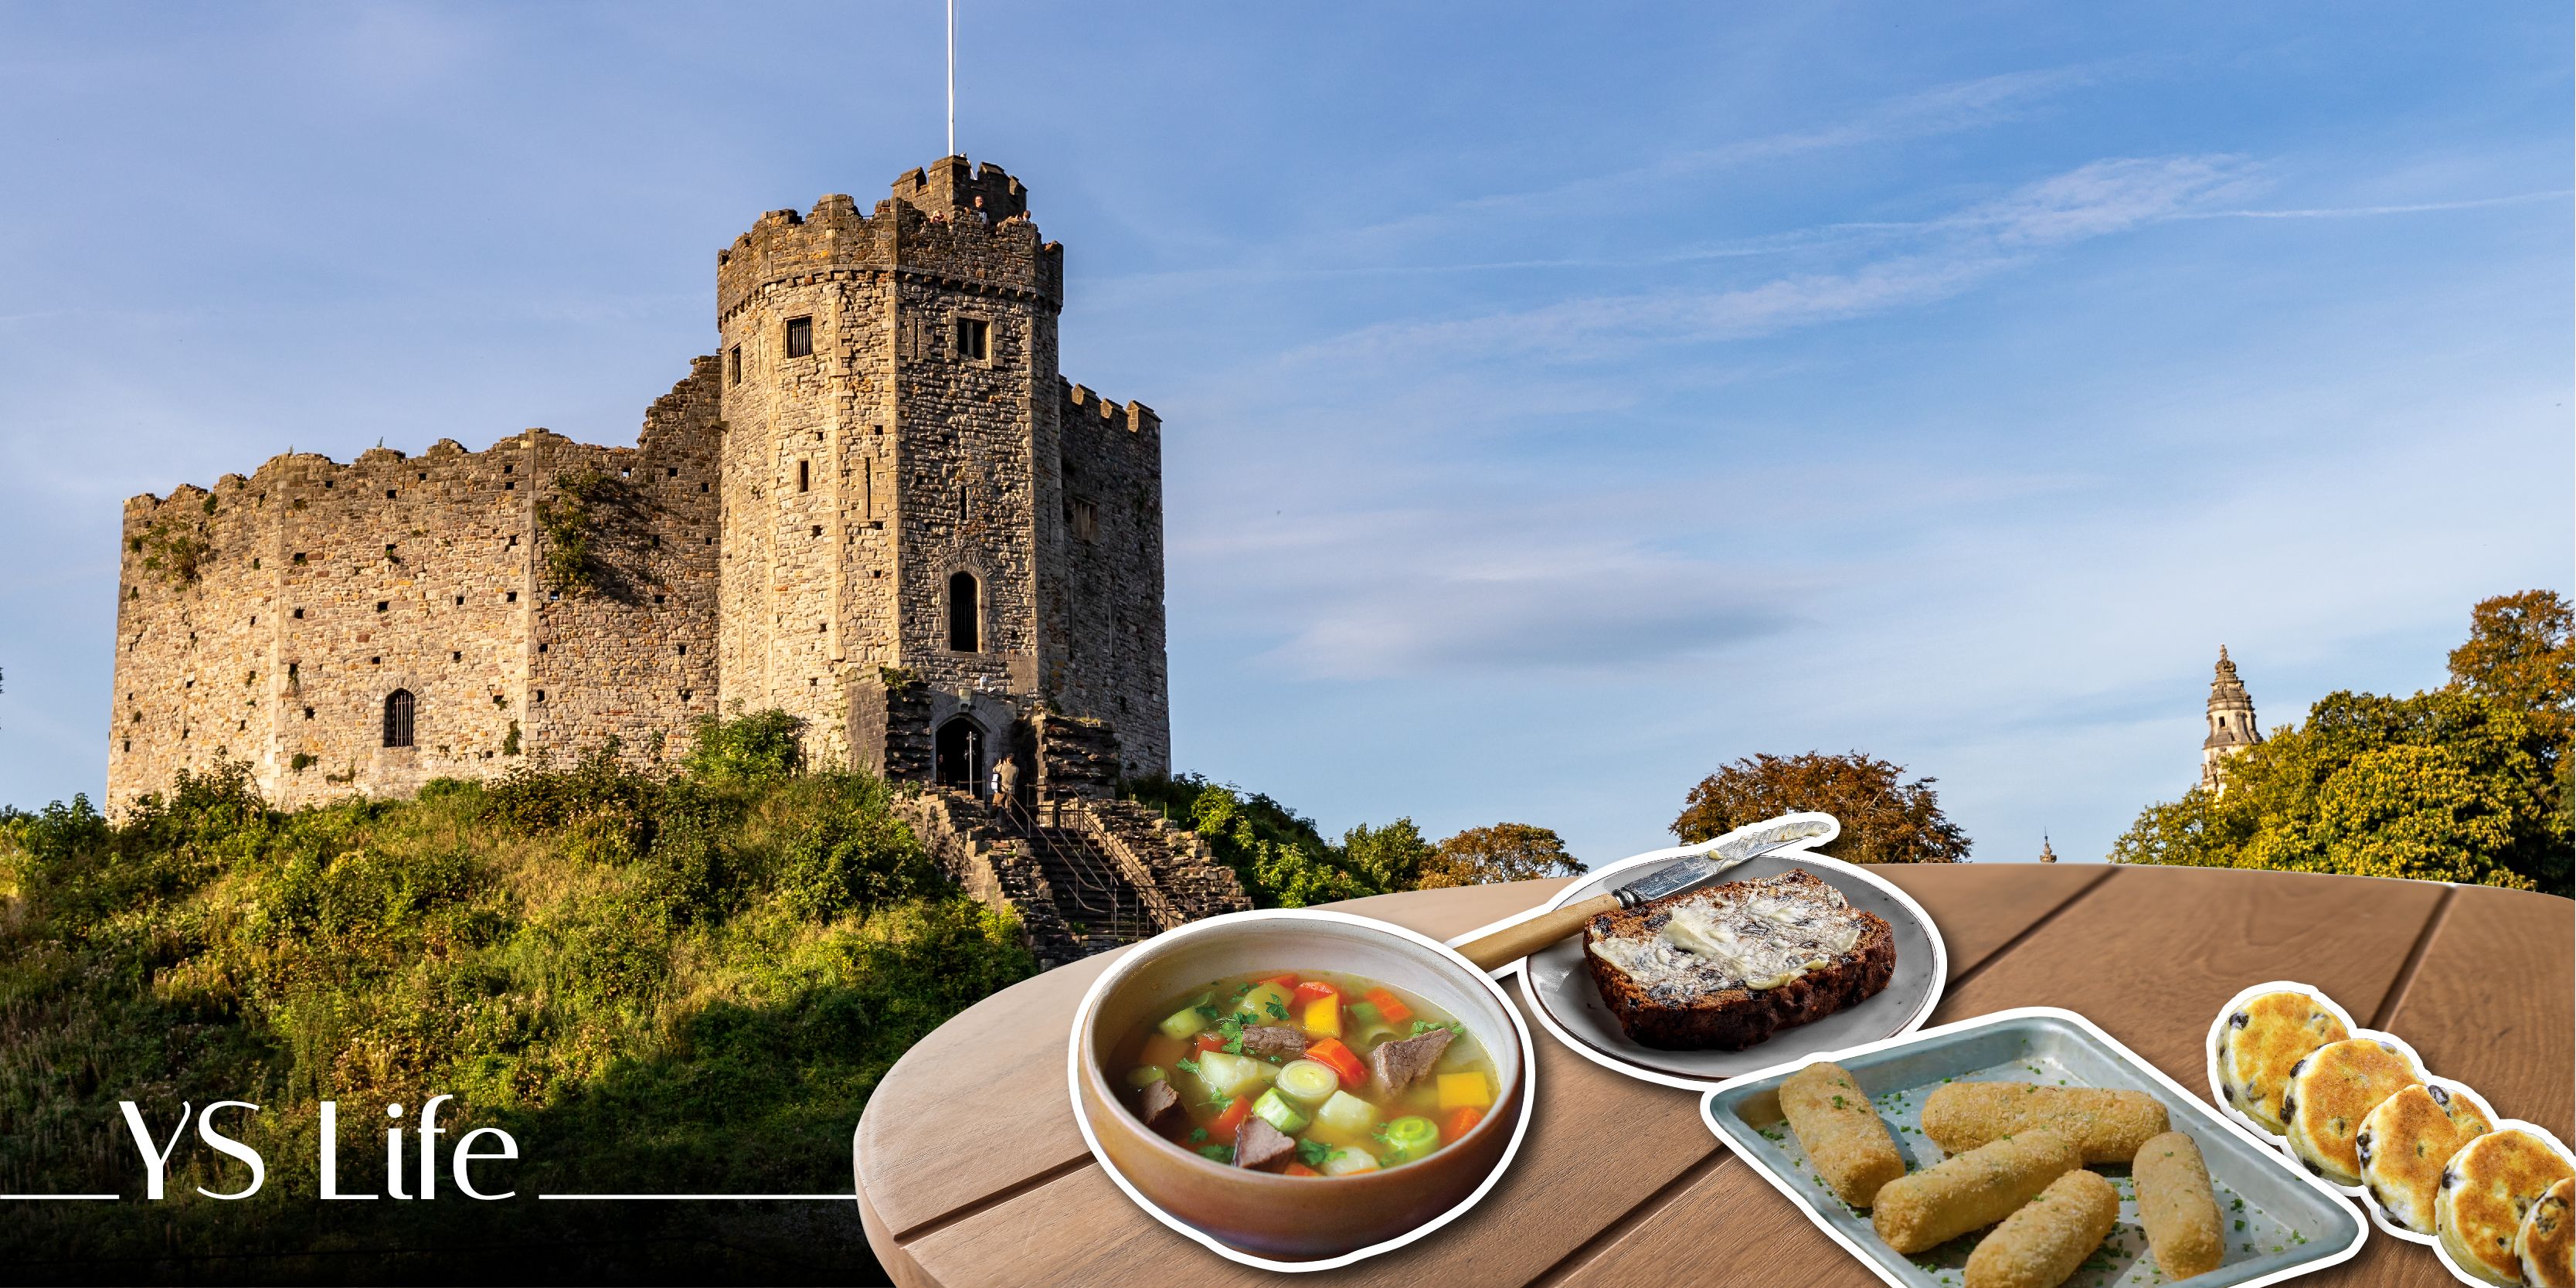 Get a taste of Wales with these 12 traditional must-try dishes